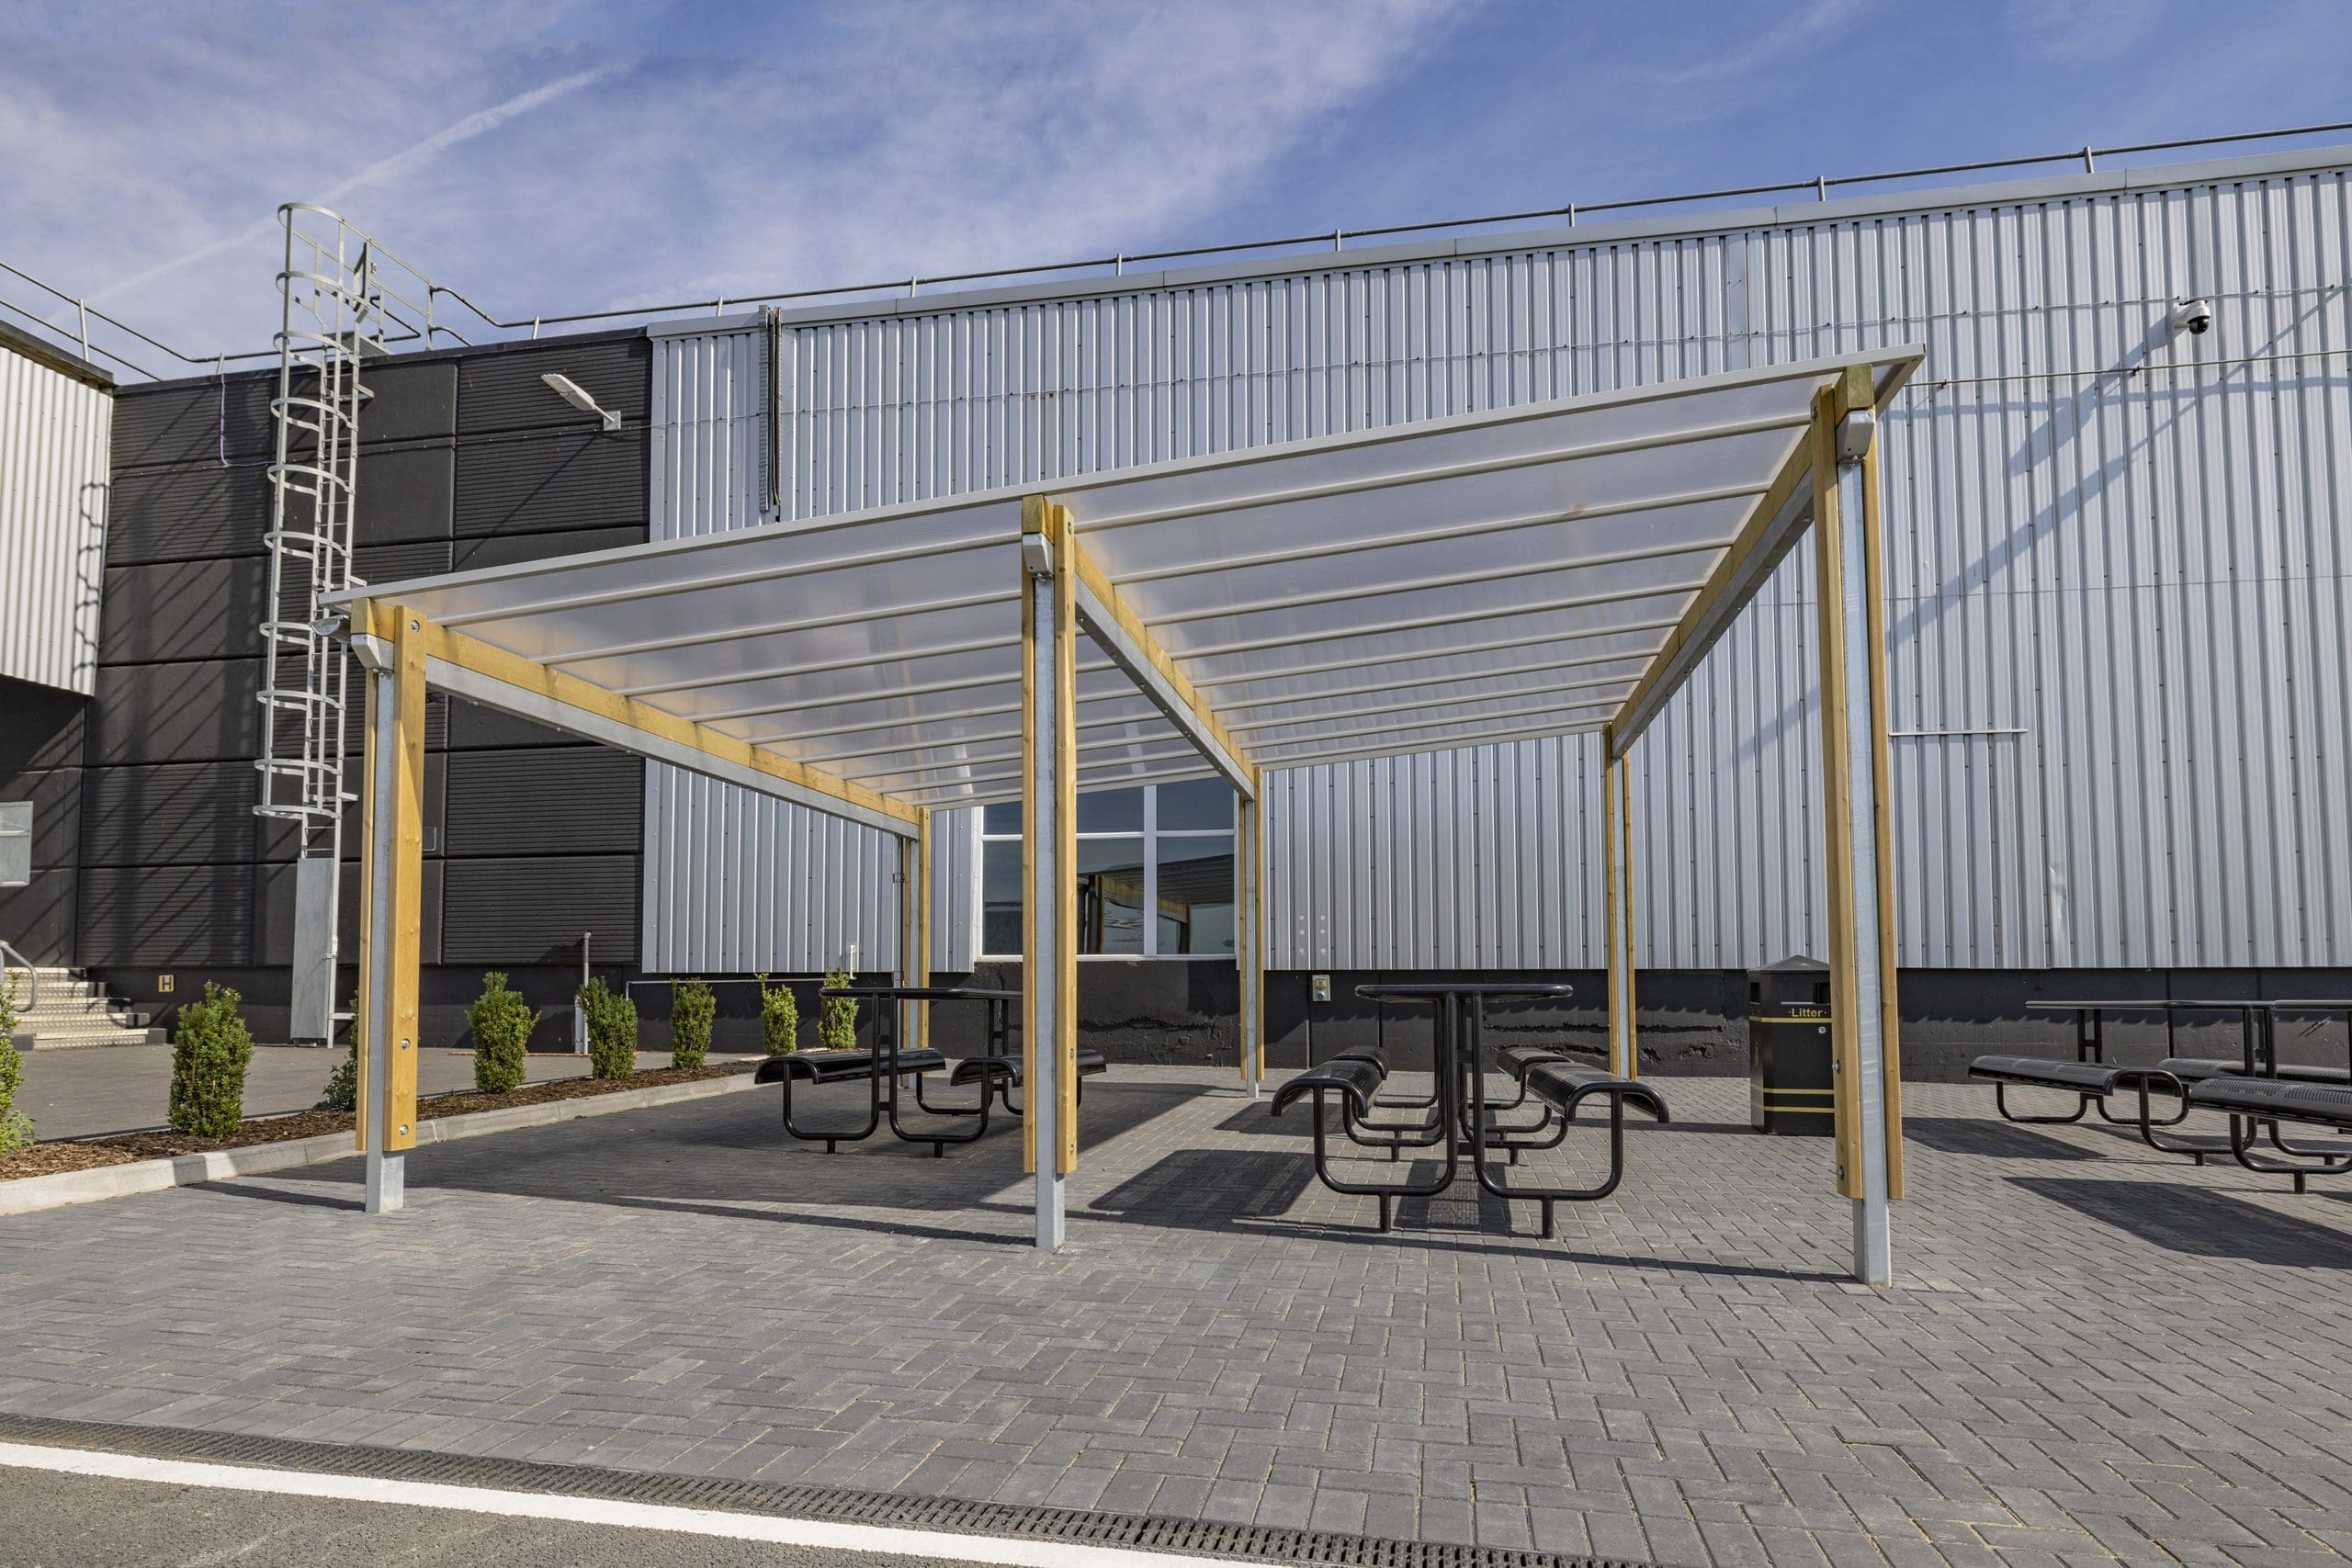 pergola-and-benches-outside-BMW-Swindon-commercial-building